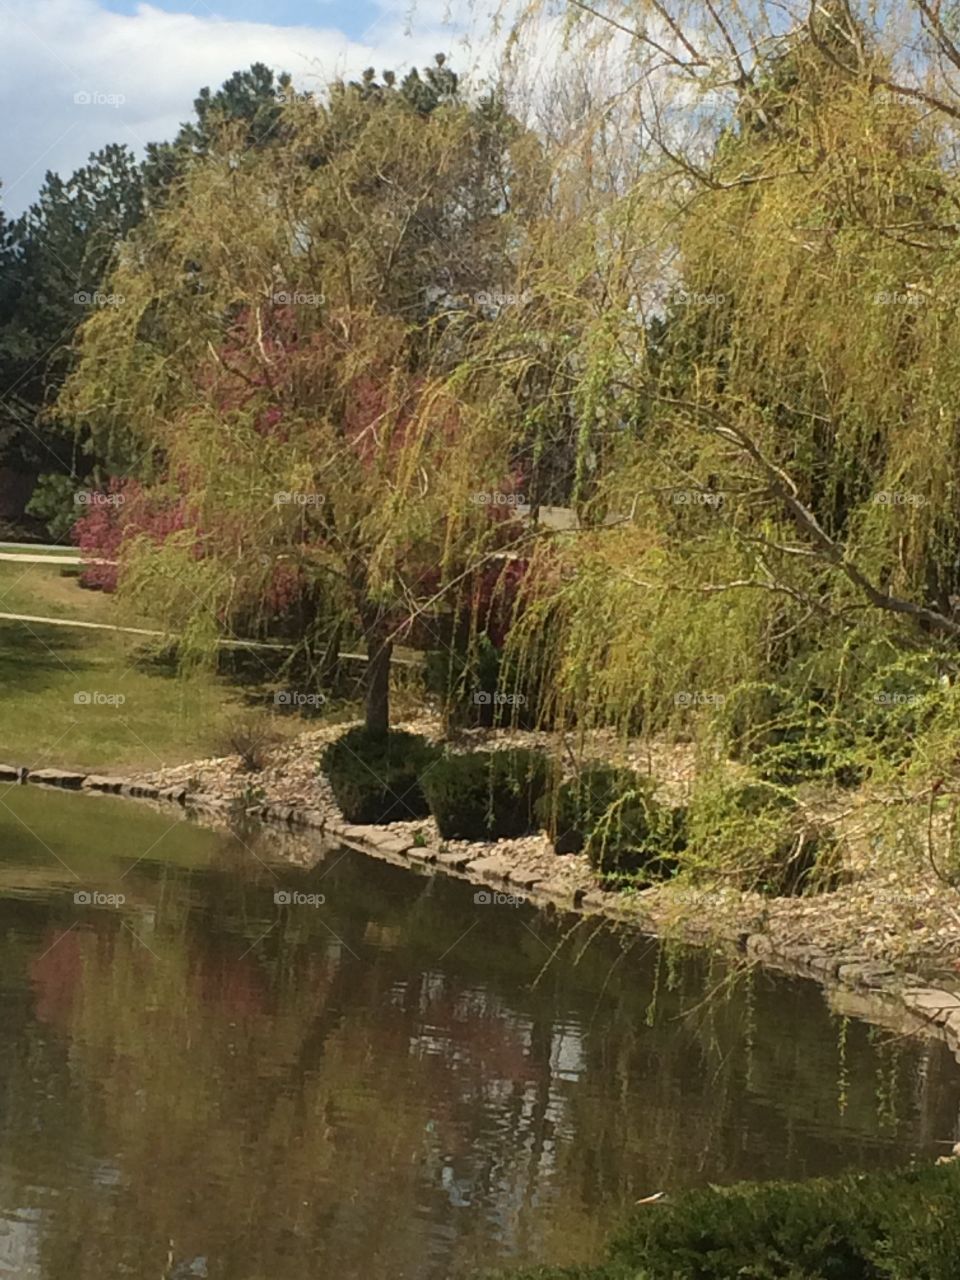 Weeping willow in park by a lake